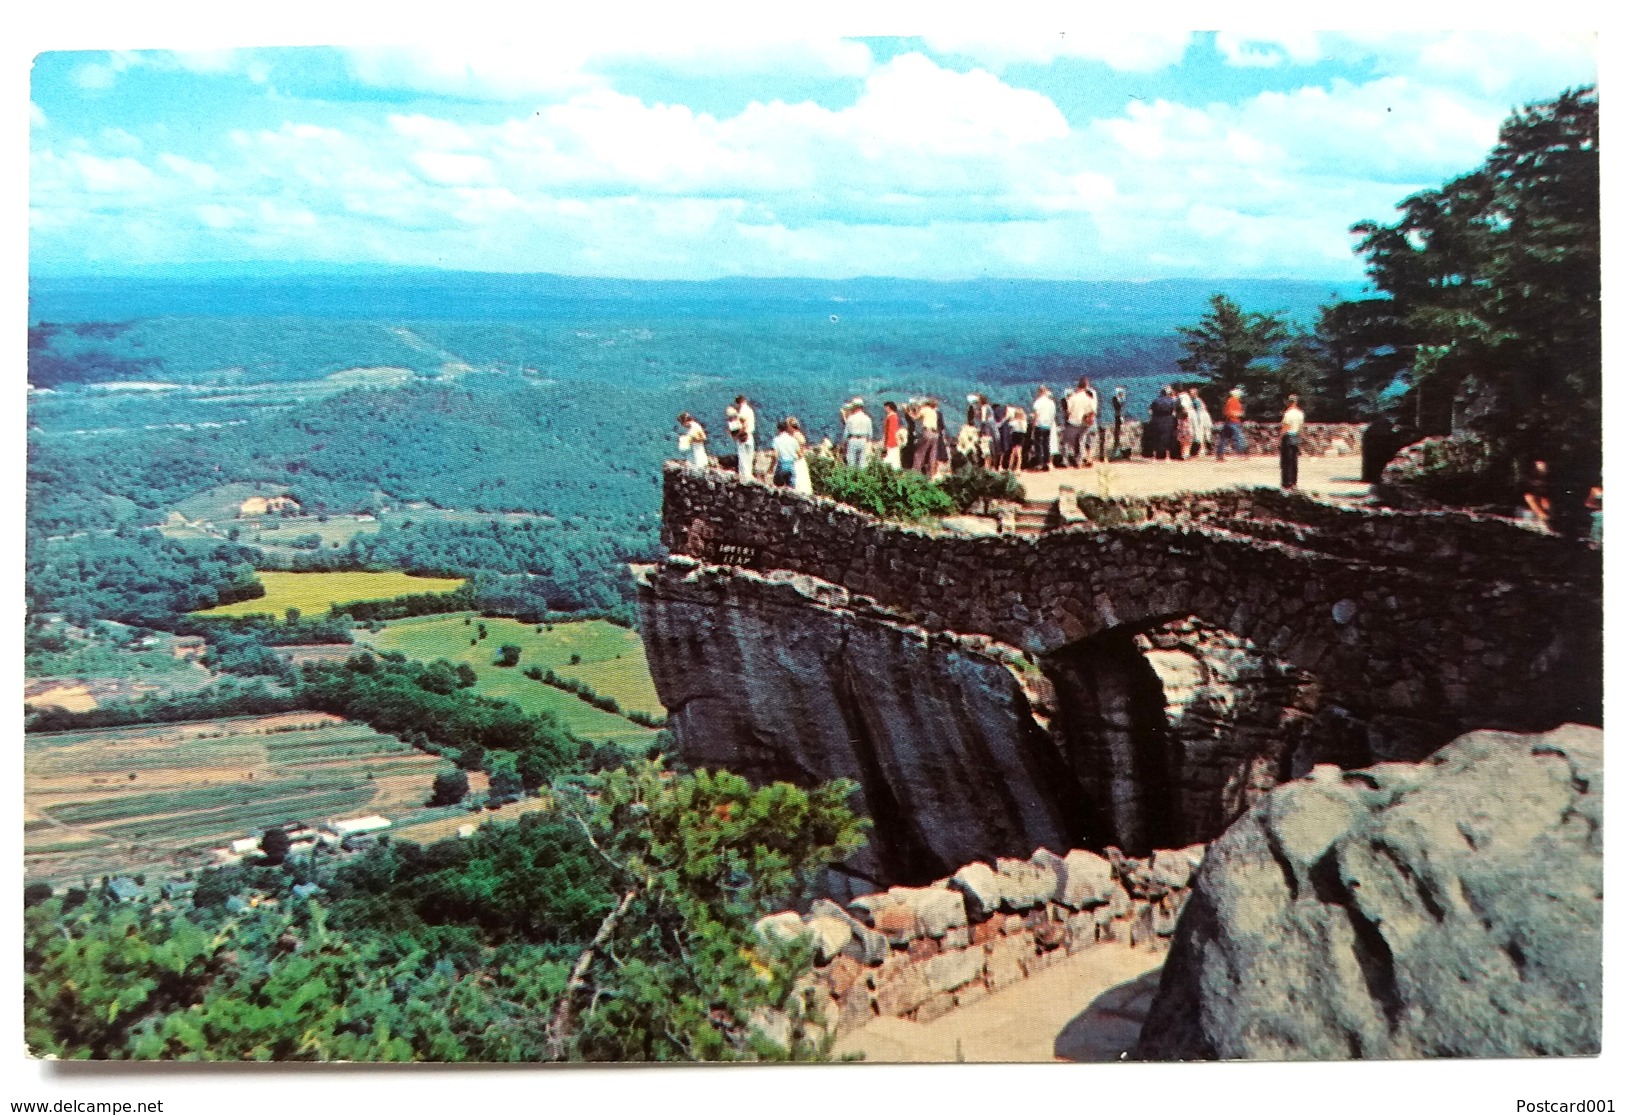 #309   Rock City Gardens LOOKOUT Mountain - Chattanooga, TENNESSEE - US Postcard - Chattanooga